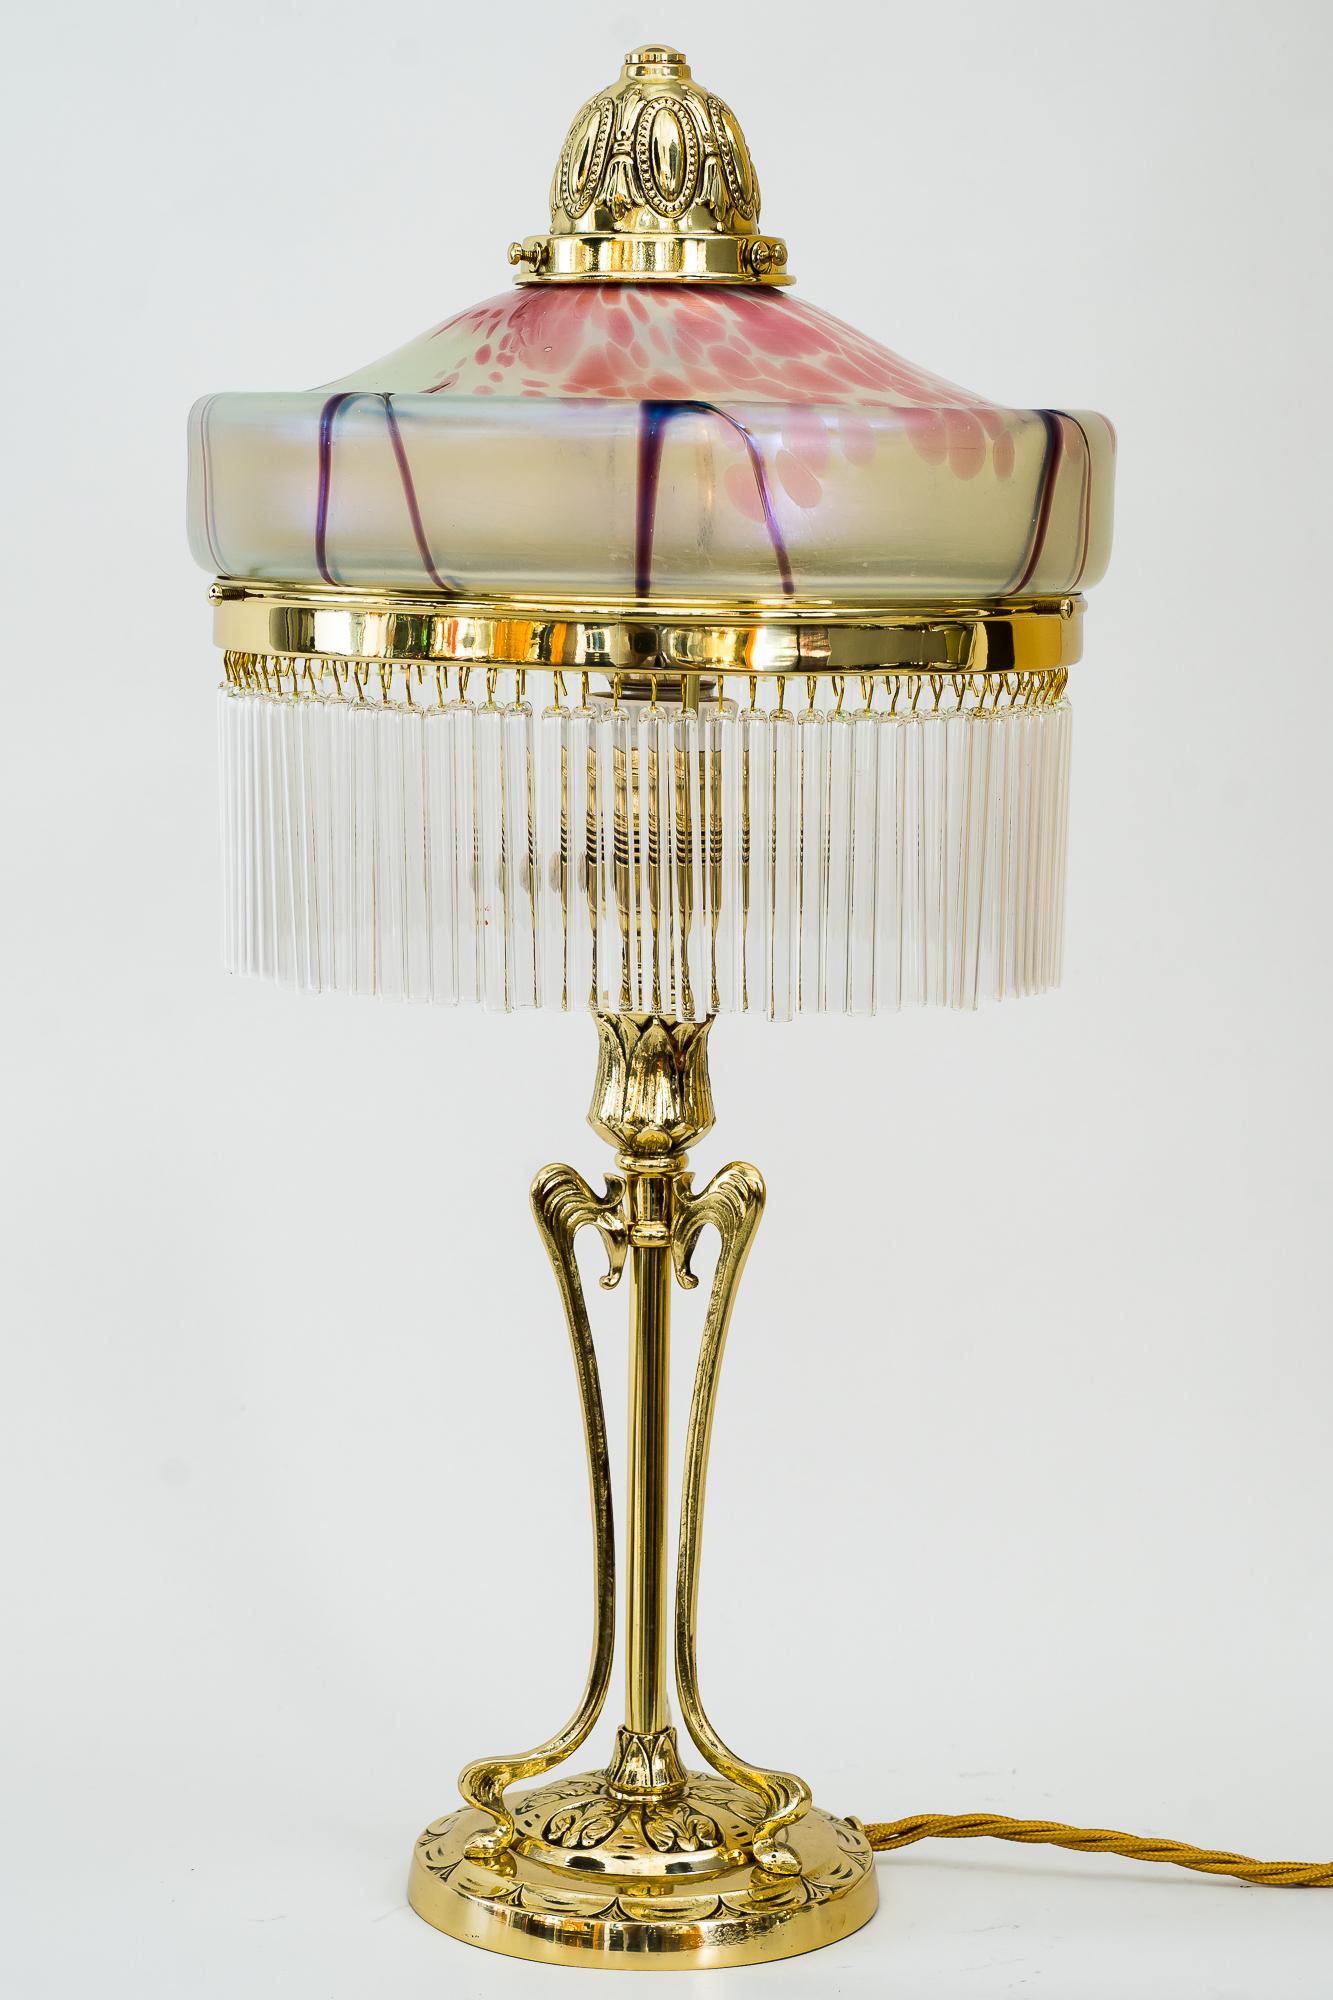 Jugendstil table lamp around 1908 with original palme koenig glass shade
Brass polished and stove enamelled
Glass sticks are replaced ( new ).
 